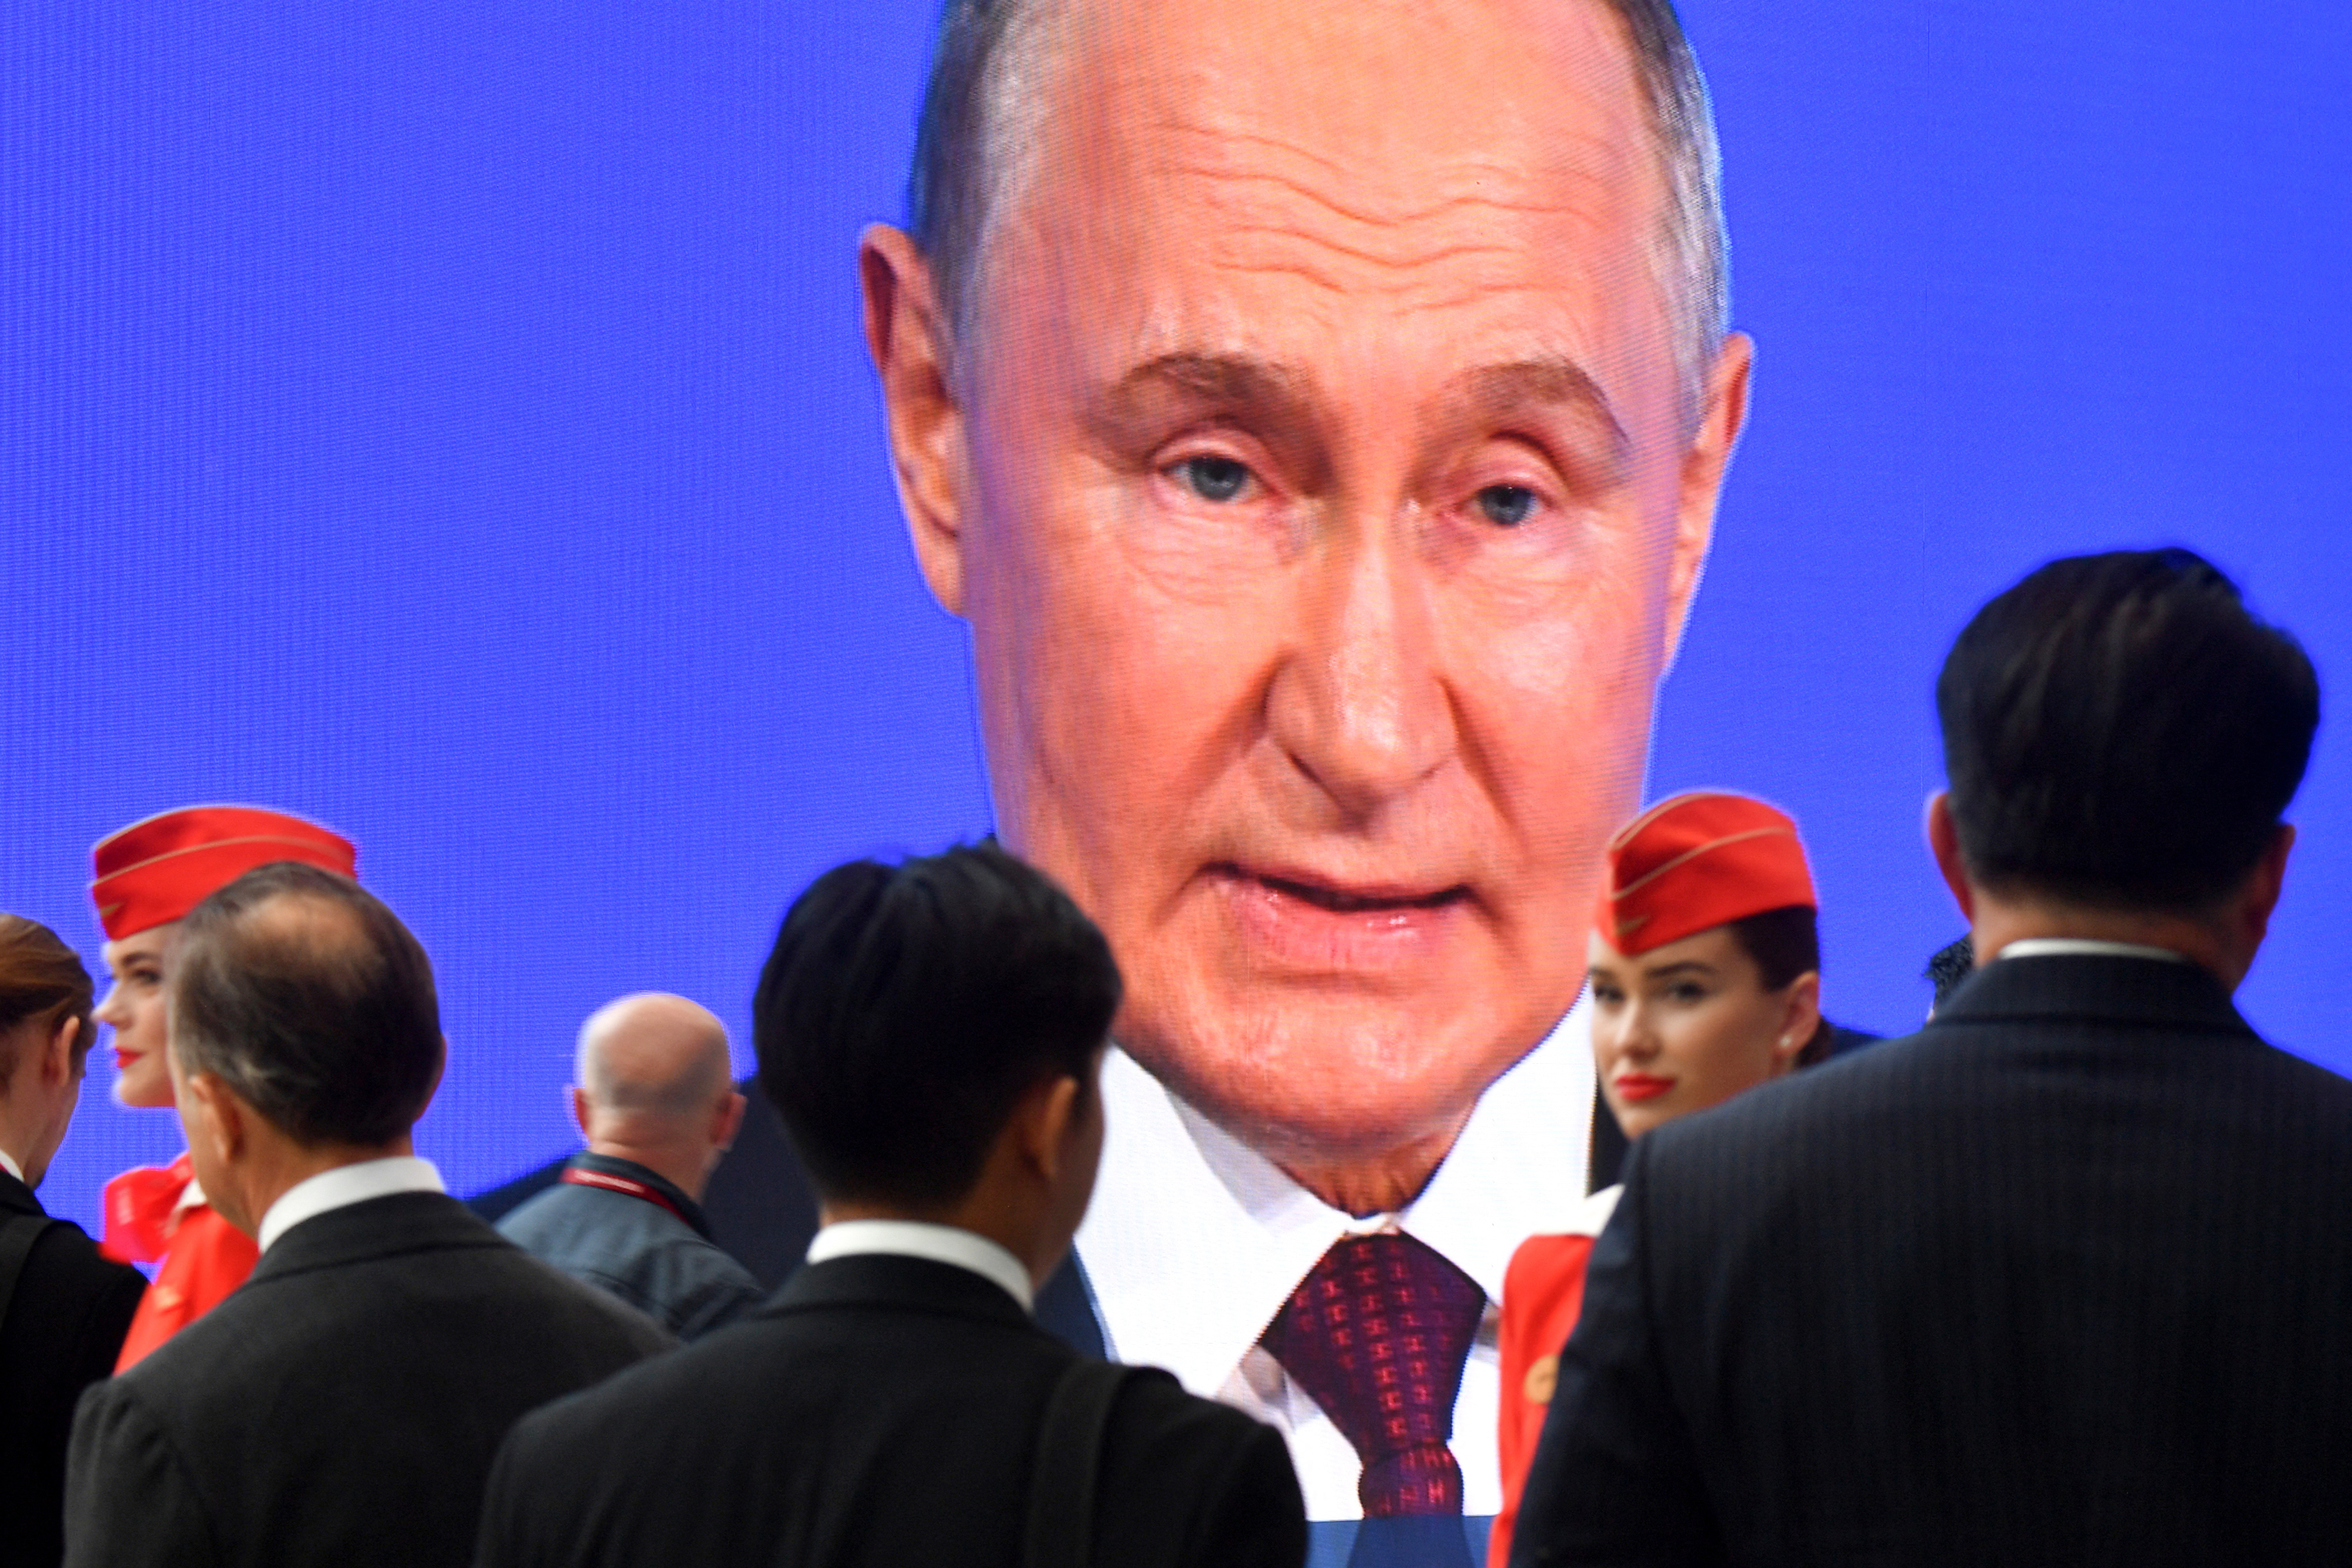 Participants stand next to a giant screen broadcasting Russian President Vladimir Putin's address during the Saint Petersburg International Economic Forum in Saint Petersburg, Russia, on Friday.